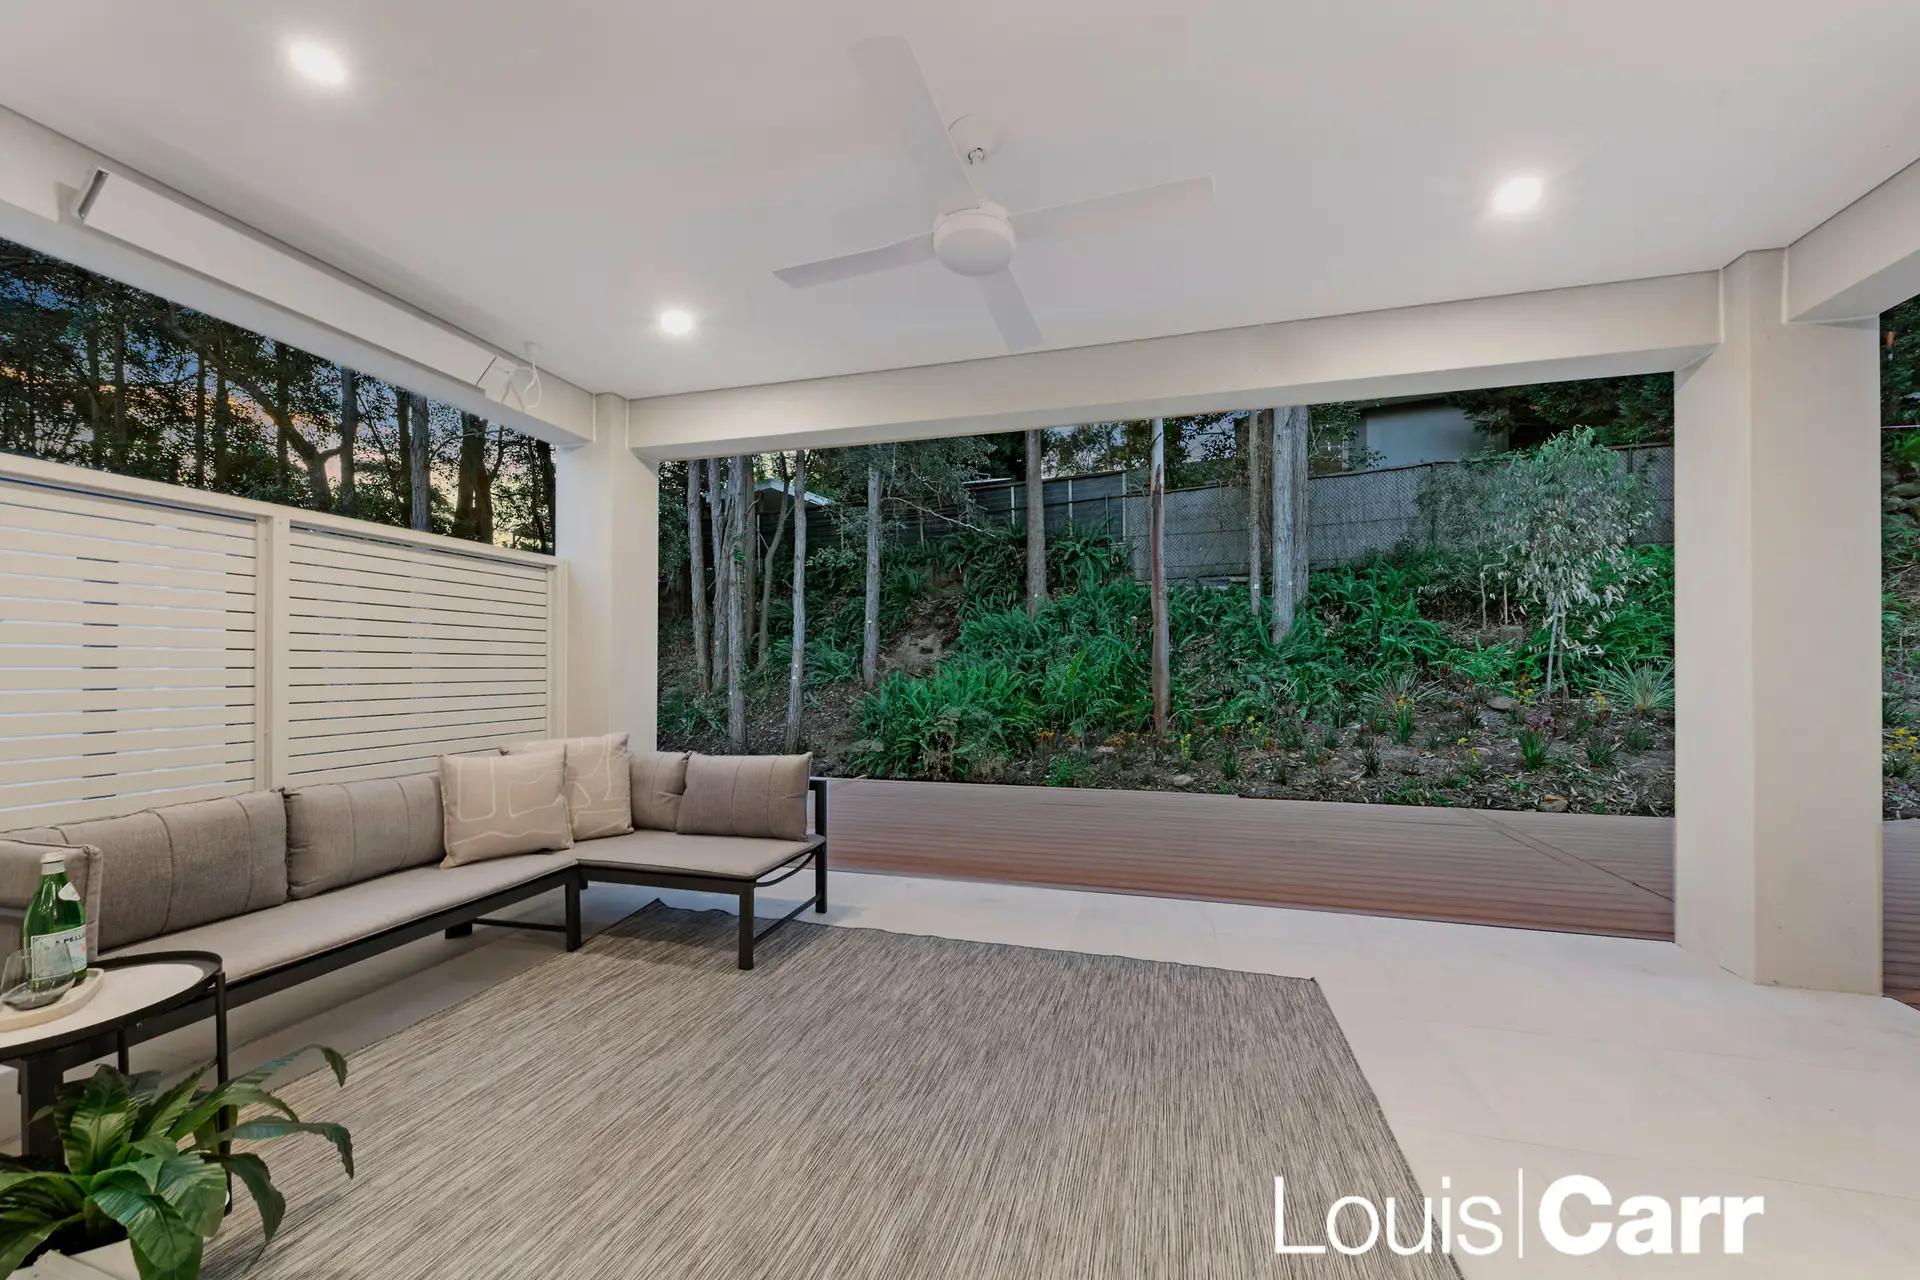 Photo #4: 20 Rivendell Way, Glenhaven - Sold by Louis Carr Real Estate